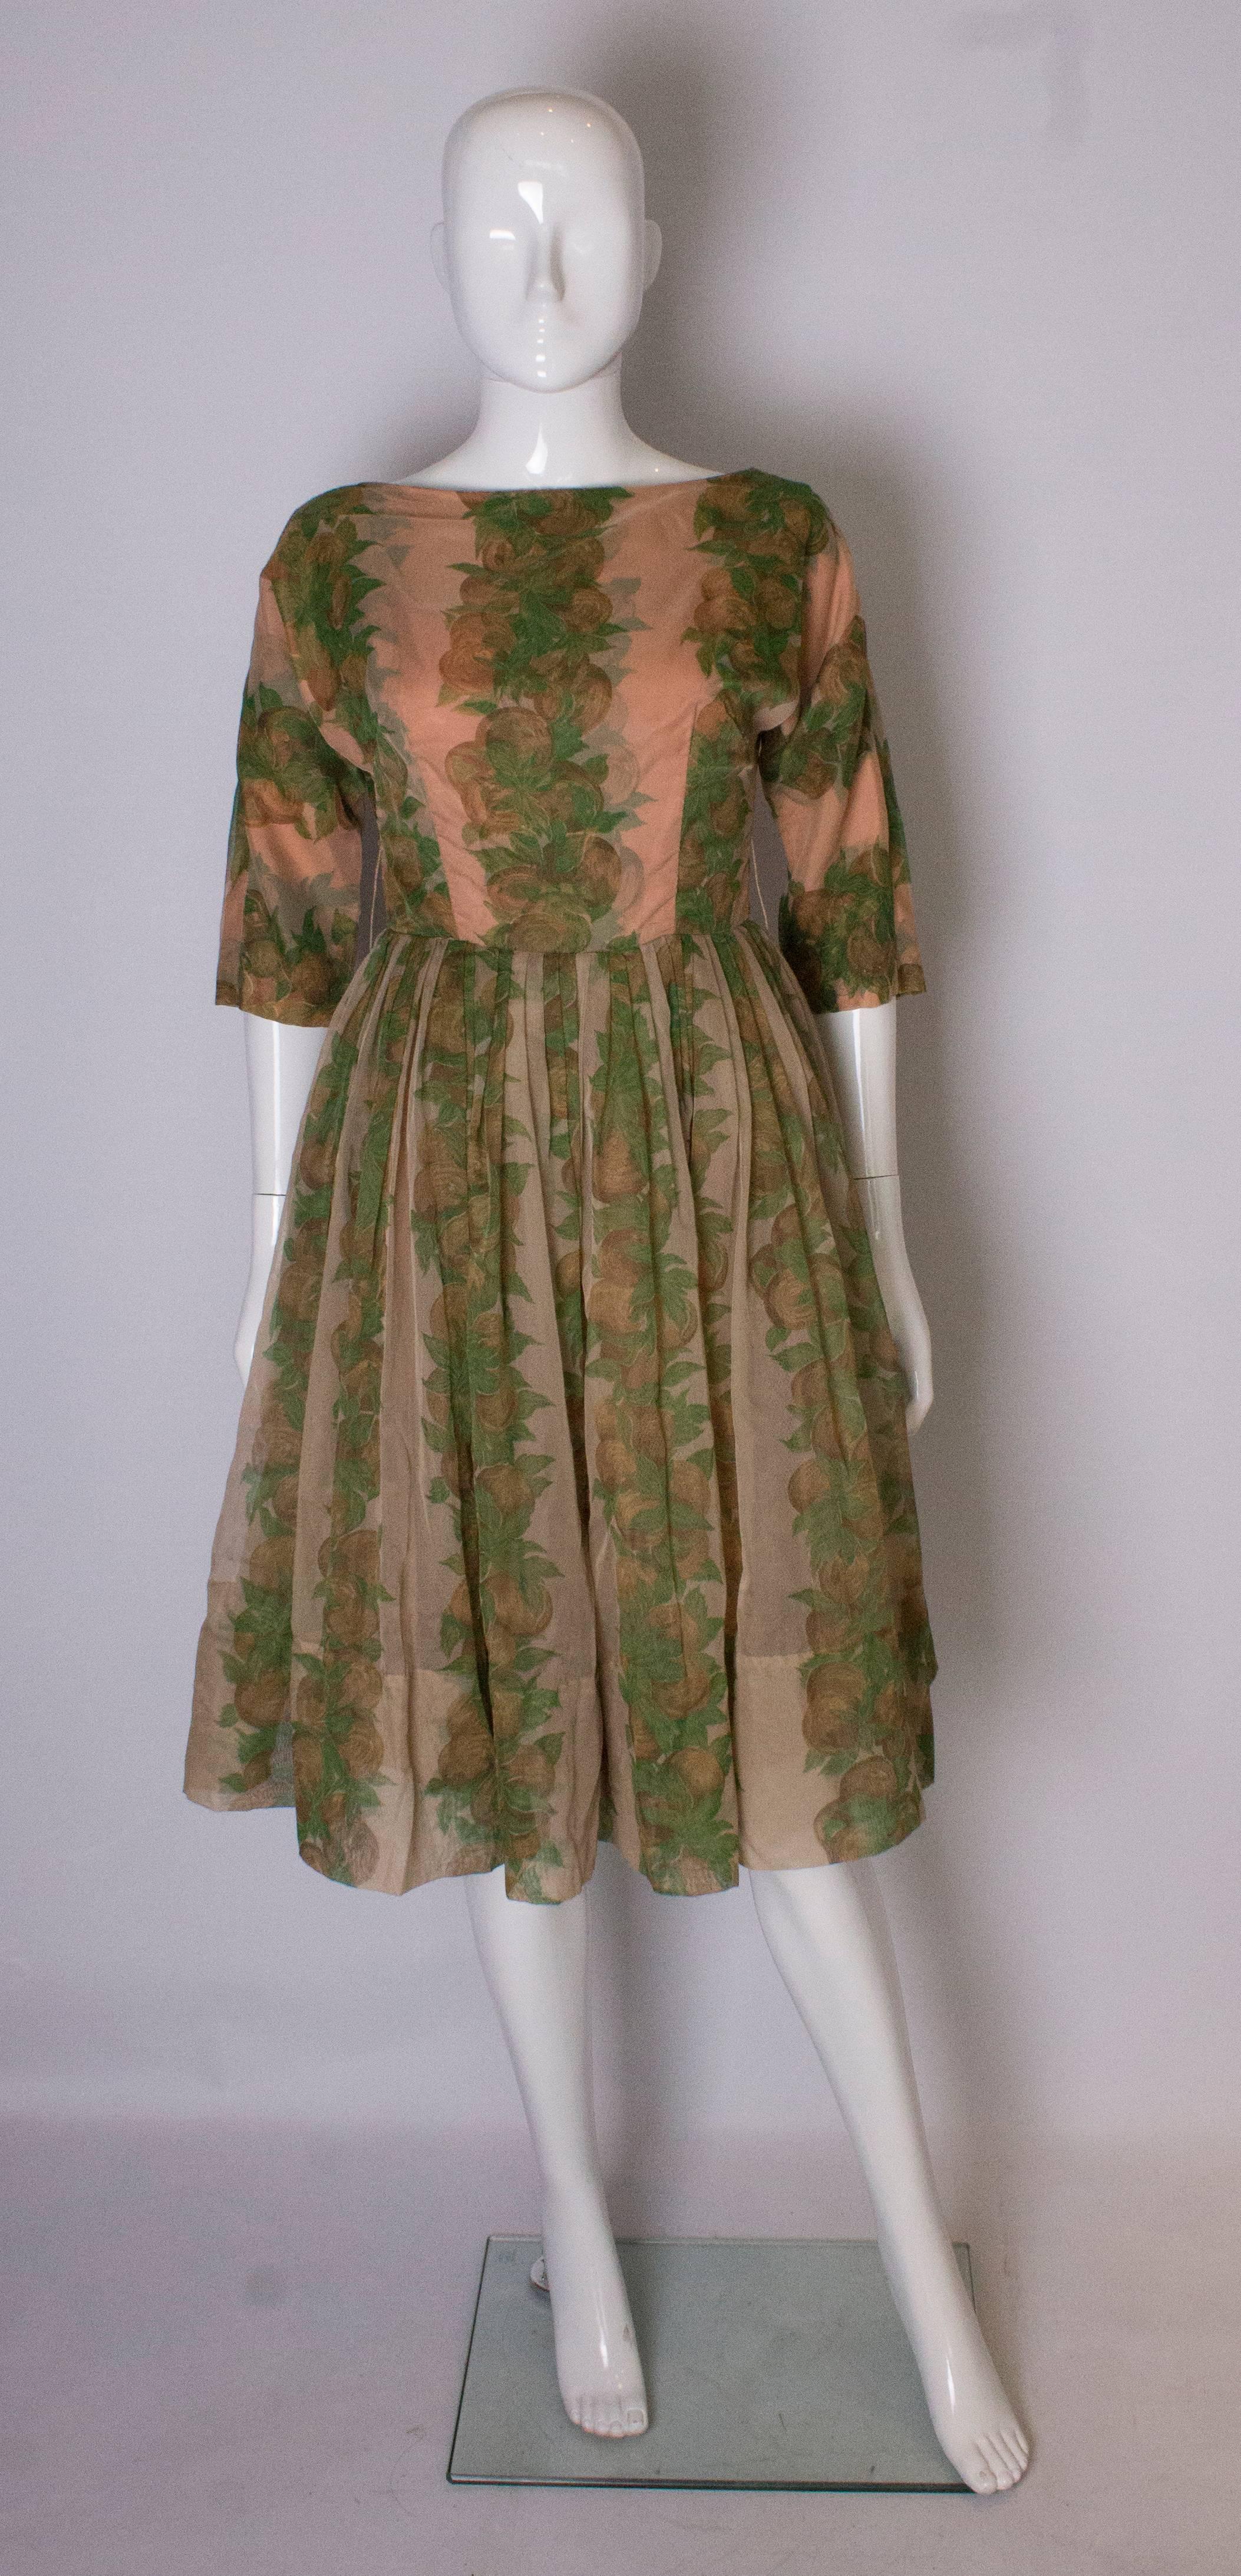 A great  1950s party dress in a wonderful summer print in shades of apricot , green and brown. It has a fabric underskirt in the same print as the top fabric,and there is a net skirt in between. The dress is gathered at the waist, with elbow length